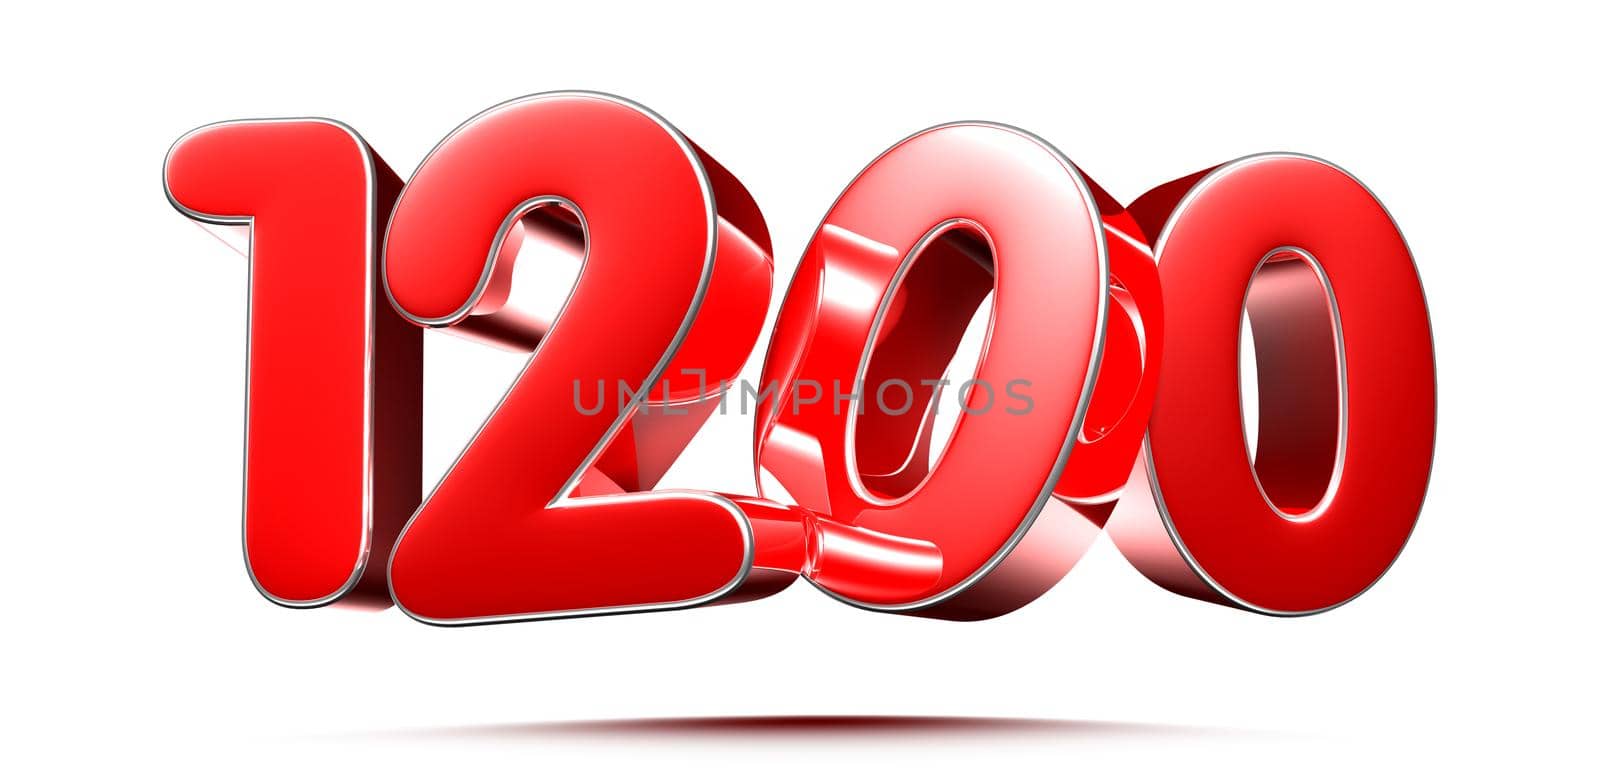 Rounded red numbers 1200 on white background 3D illustration with clipping path by thitimontoyai